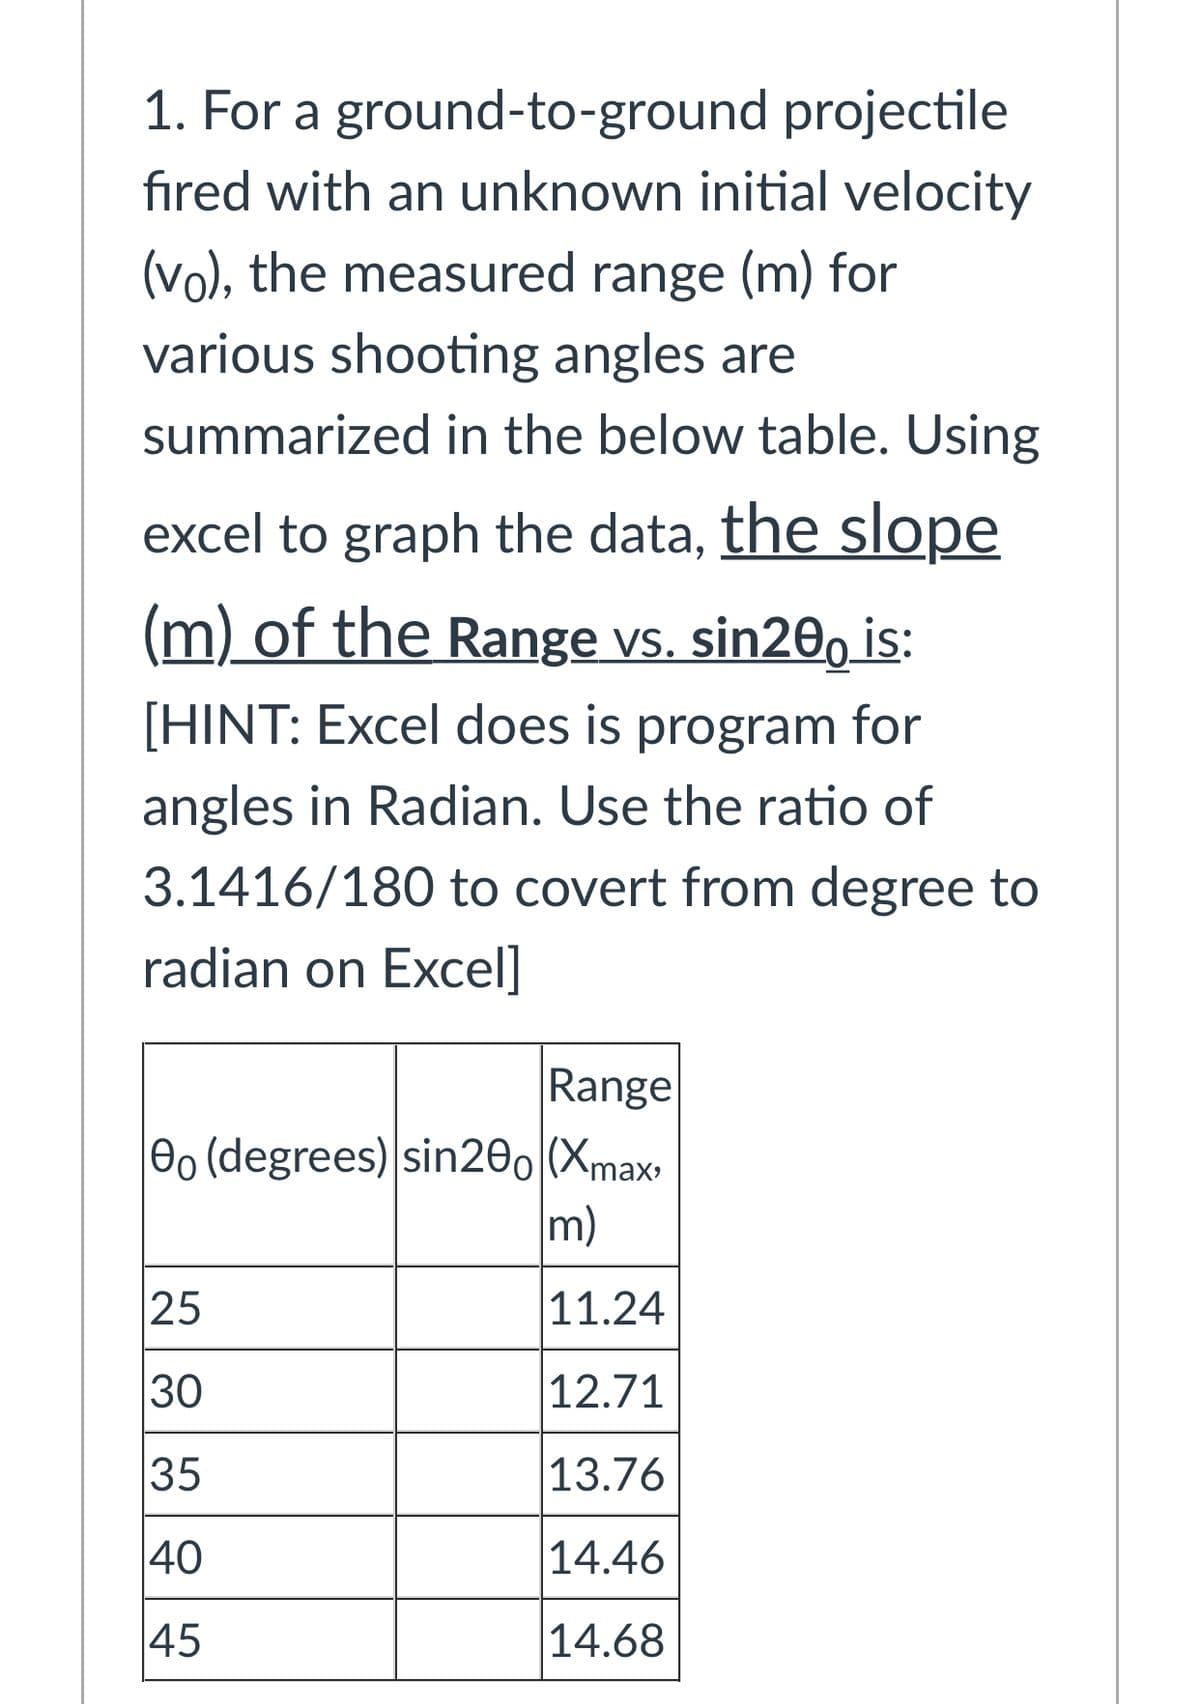 1. For a ground-to-ground projectile
fıred with an unknown initial velocity
(vo), the measured range (m) for
various shooting angles are
summarized in the below table. Using
excel to graph the data, the slope
(m) of the Range vs. sin20, is:
[HINT: Excel does is program for
angles in Radian. Use the ratio of
3.1416/180 to covert from degree to
radian on Excel]
Range
eo (degrees) sin200 (Xmax
m)
max»
25
11.24
30
12.71
35
13.76
40
14.46
|45
|14.68
